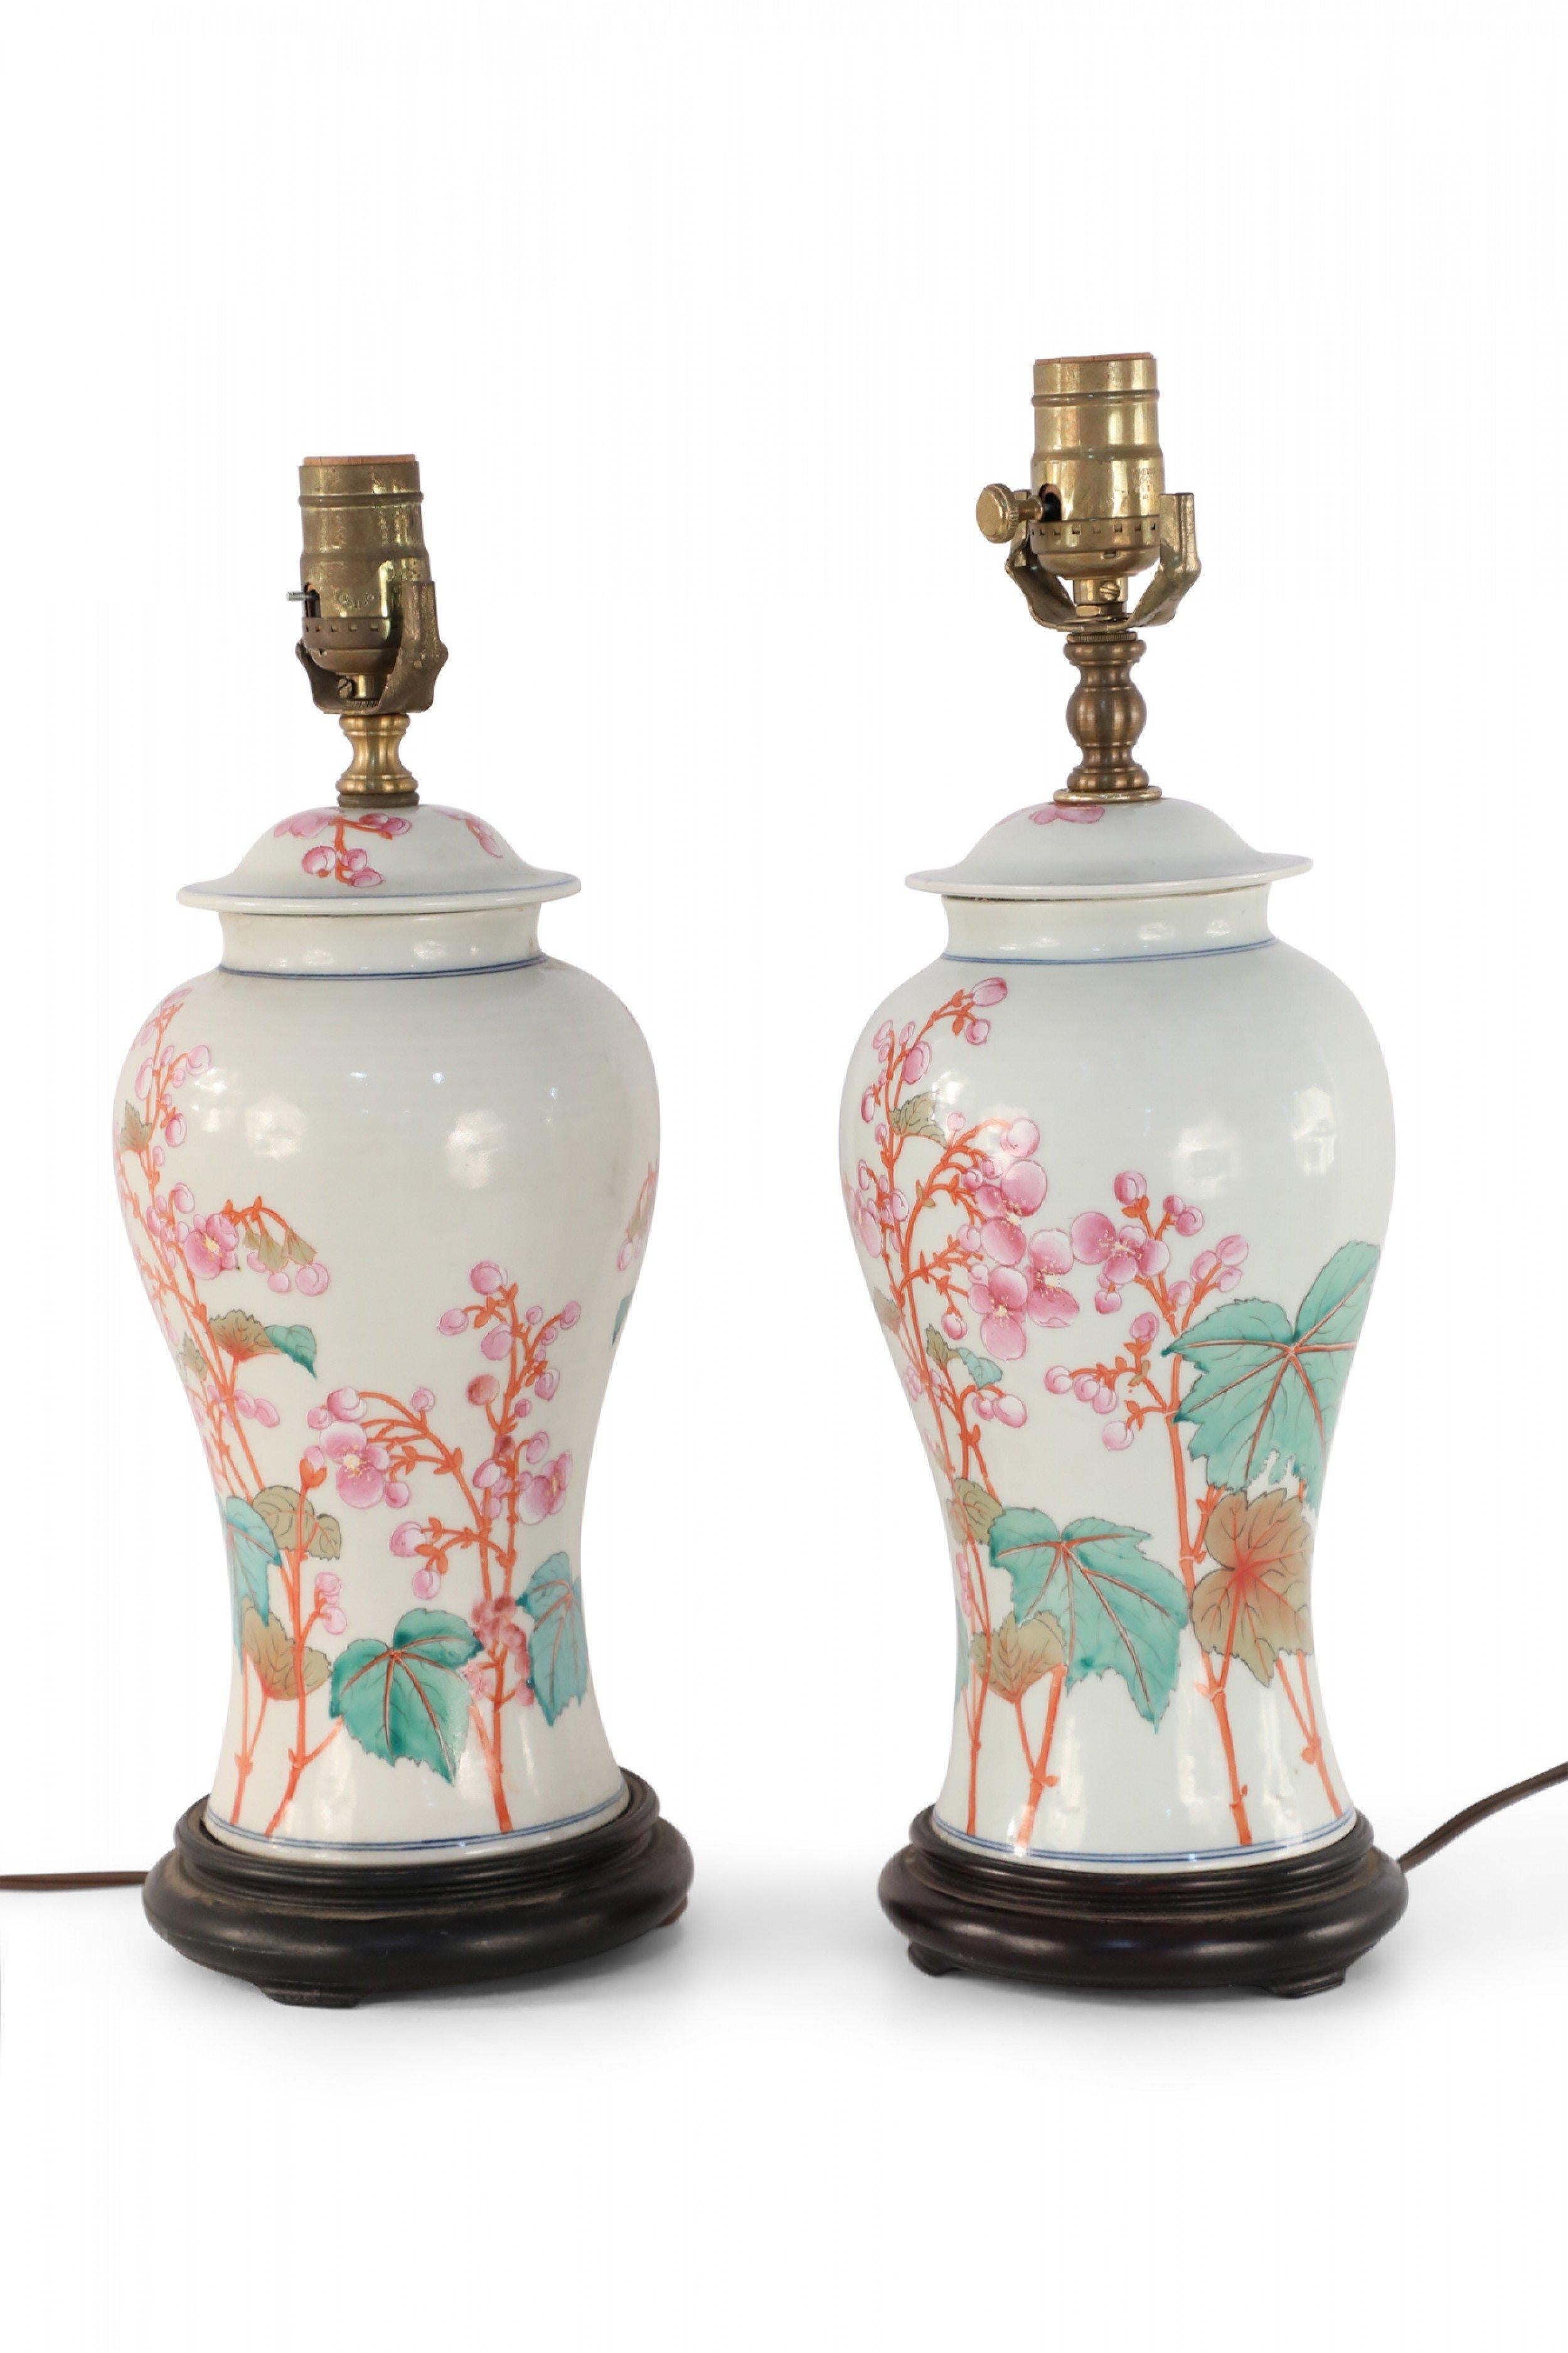 20th Century Pair of Chinese Off-White Orange and Pink Floral Motif Porcelain Table Lamps For Sale